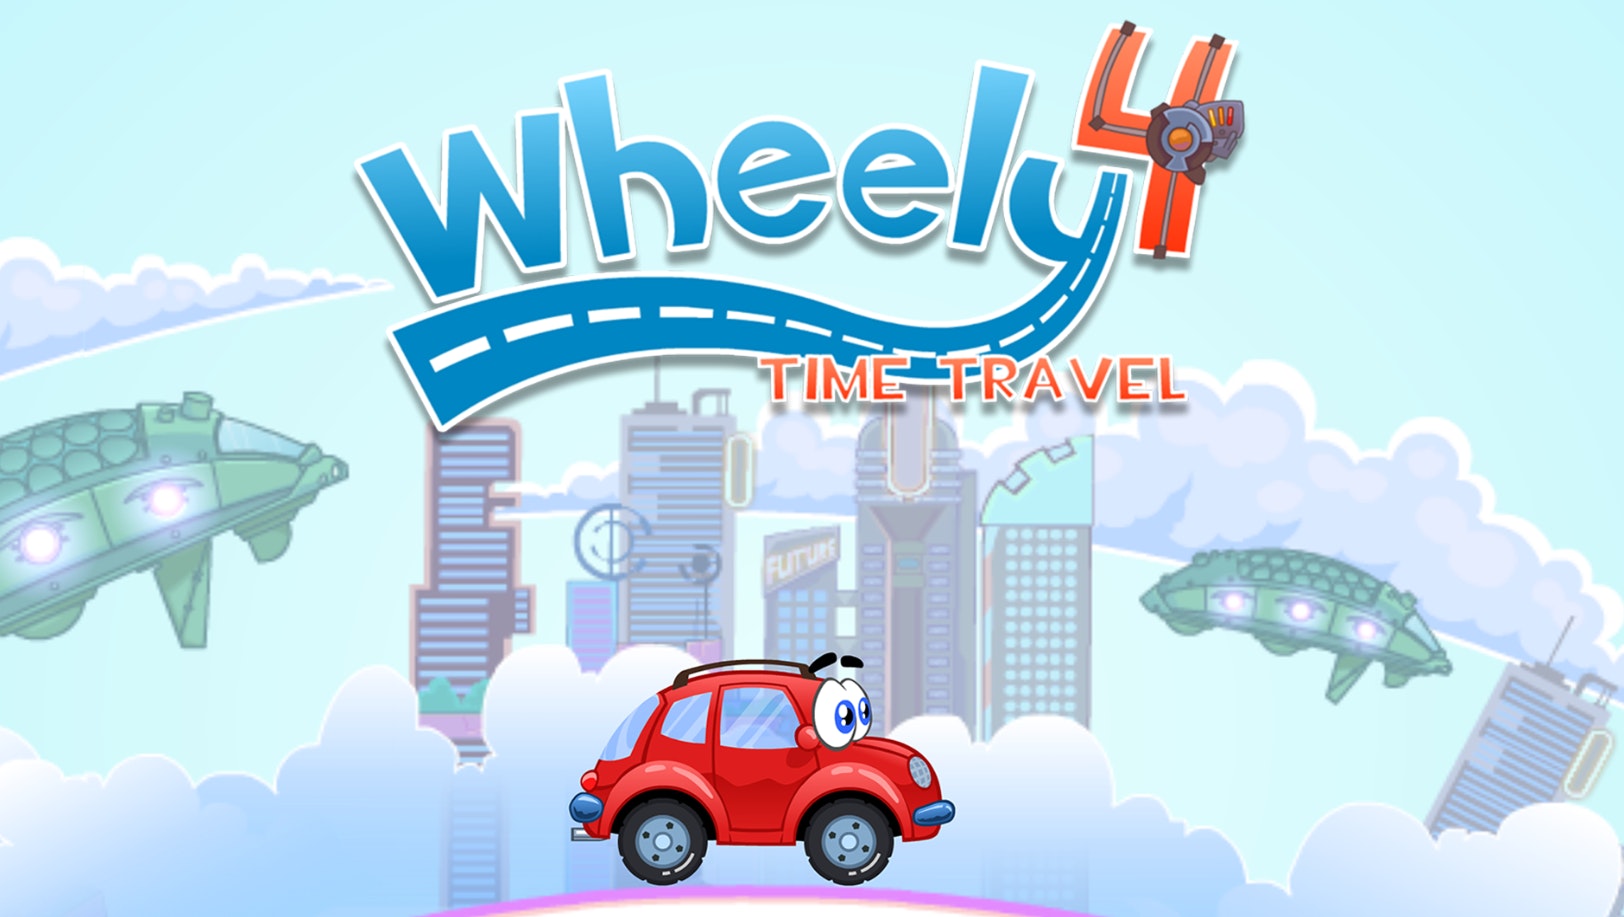 Happy wheels 2 Games Wheely 4 time travel  Time travel, Happy wheels game,  Games to play